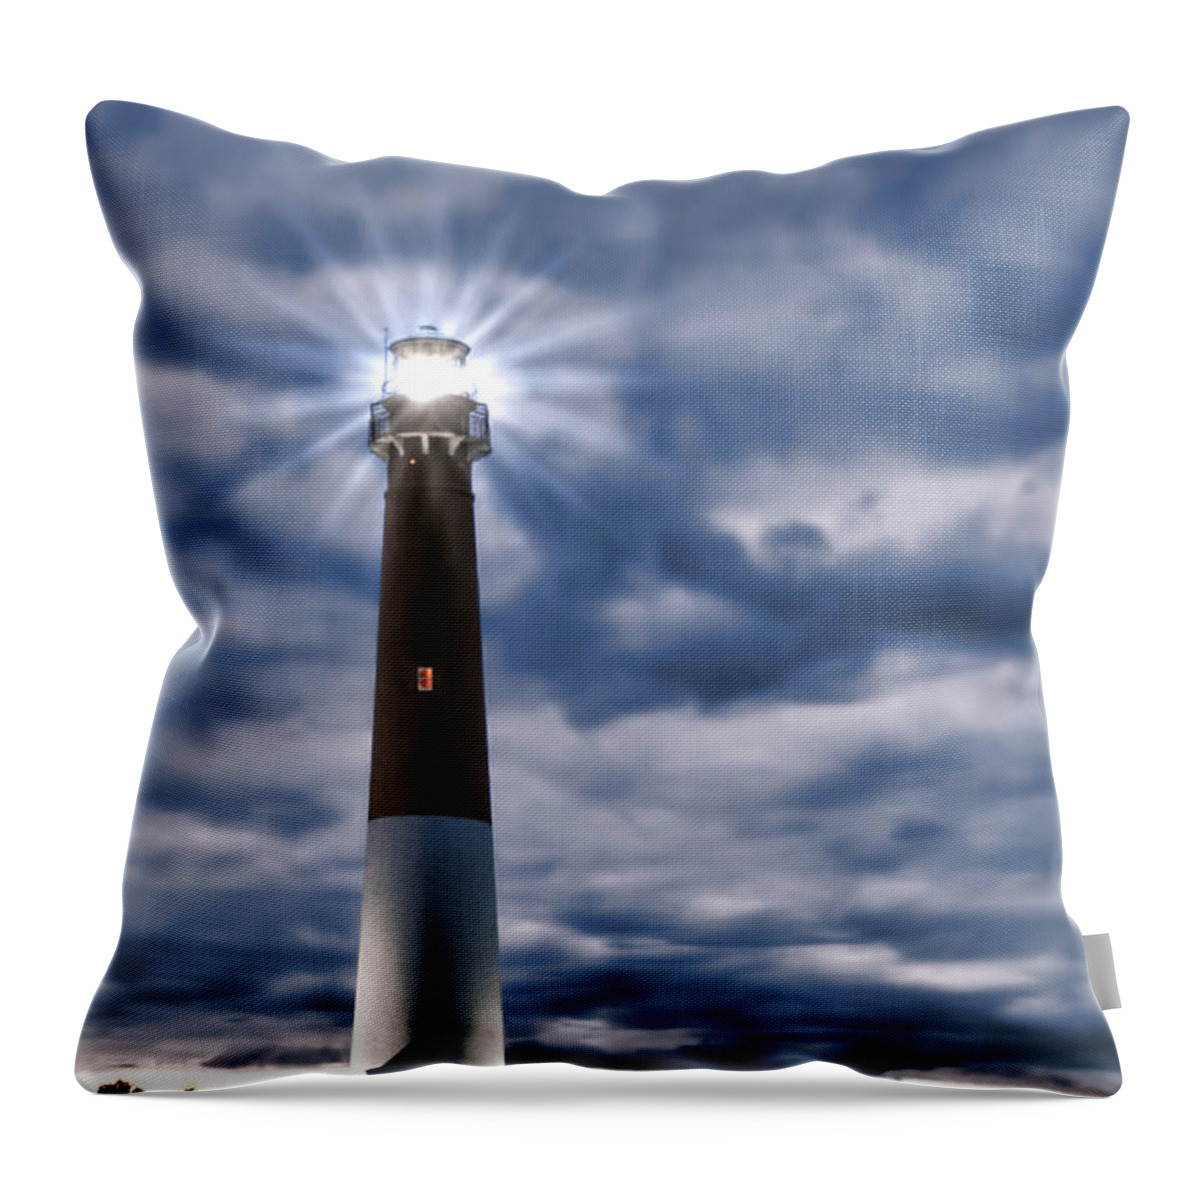 Barnegat Throw Pillow featuring the photograph Barnegat Magic by Olivier Le Queinec